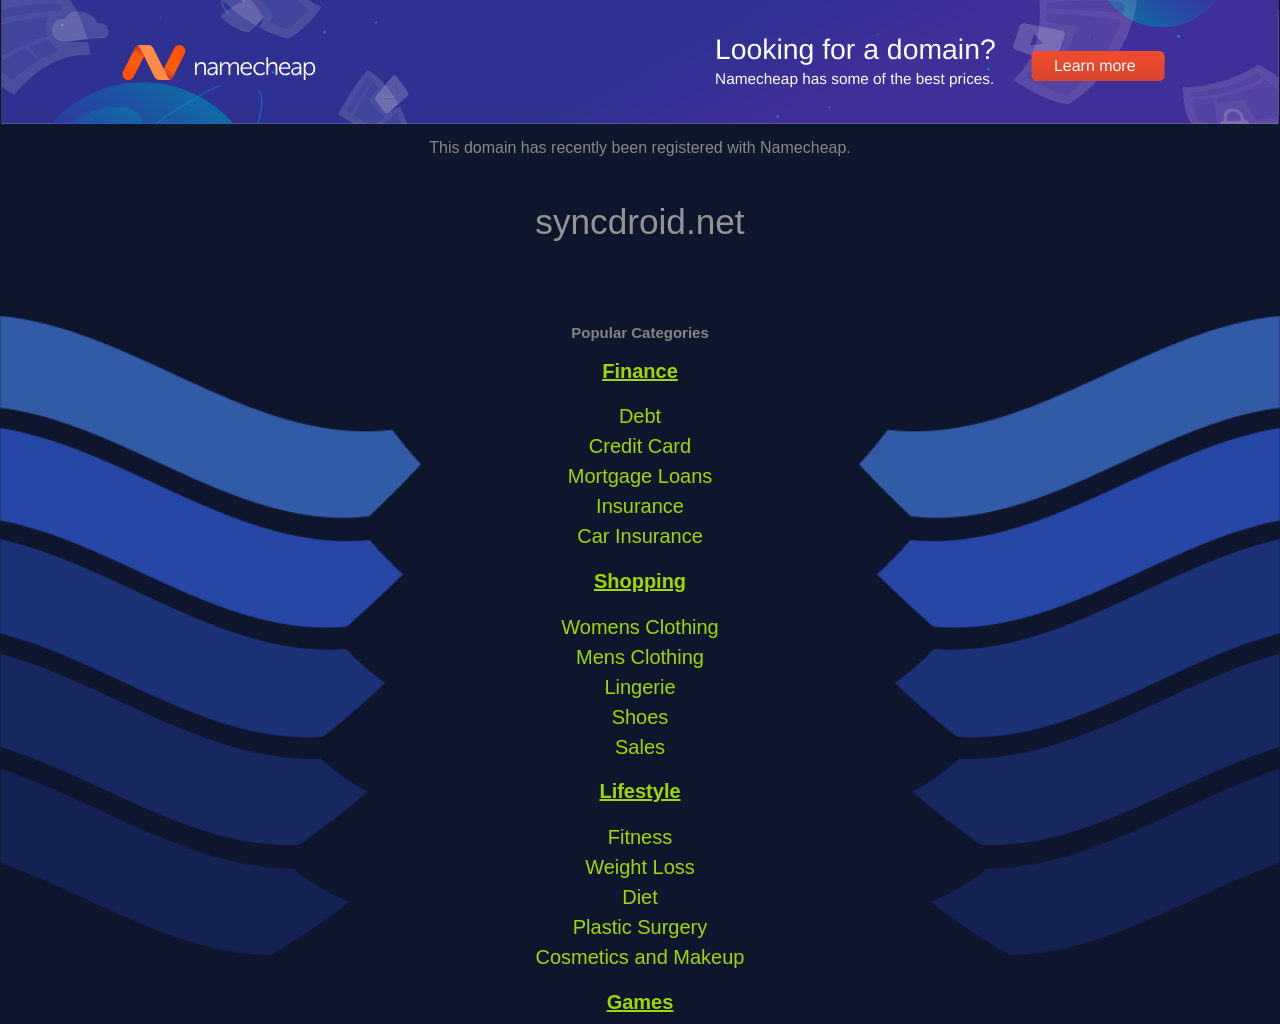 syncdroid.net